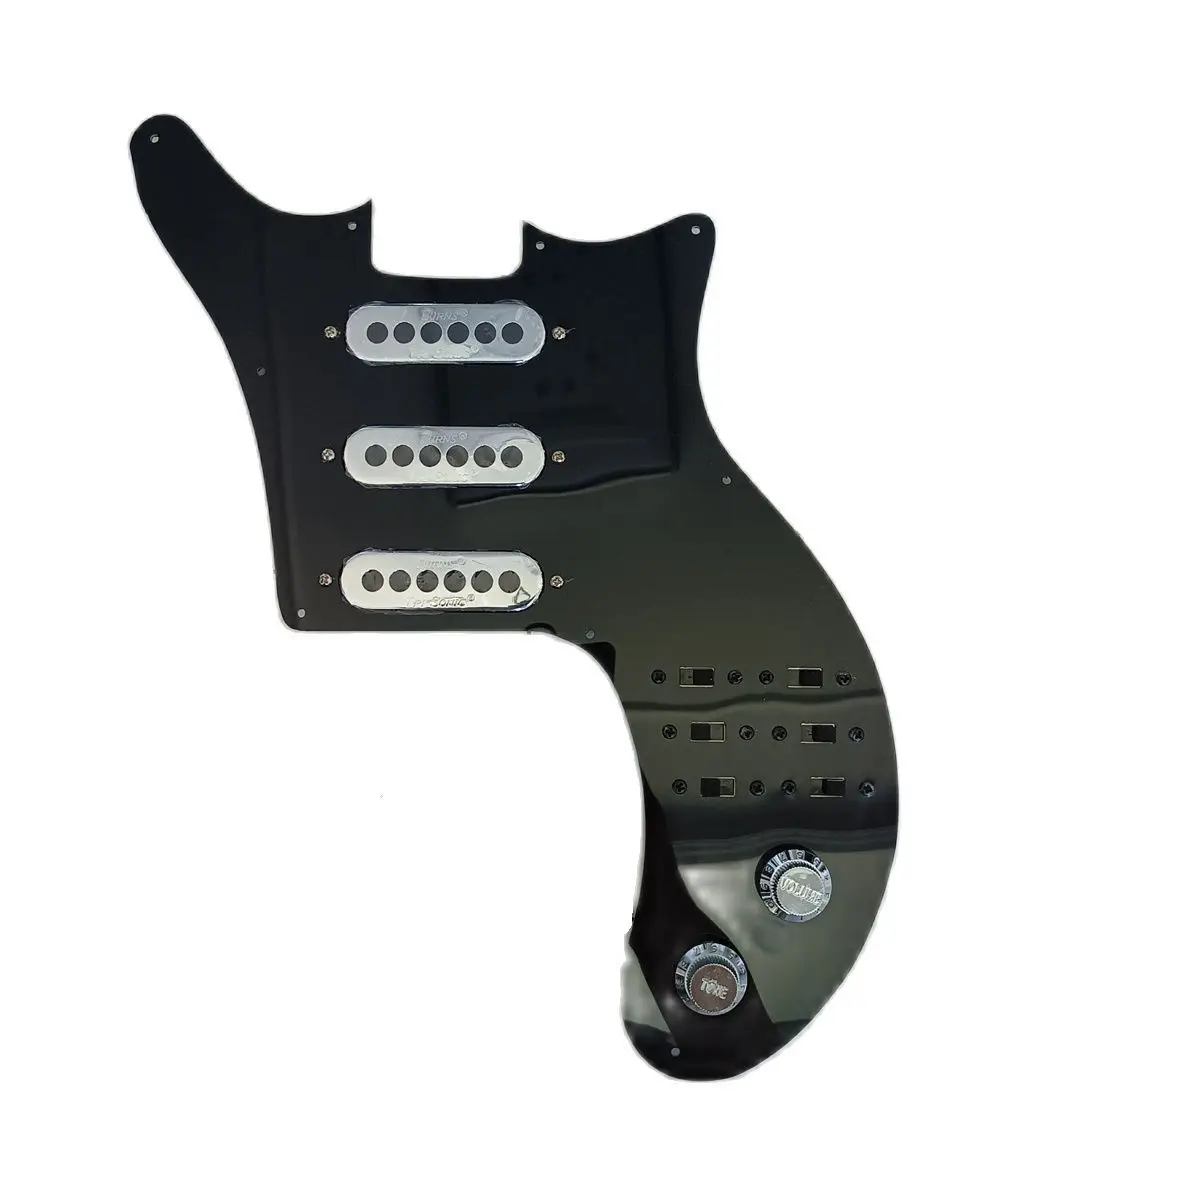 

YUMIYA SSS Loarded Prewired Pickguard Harness Chrome Burns Tri-Sonic Pickups Multifunction Switch For Brian May Series Guitar